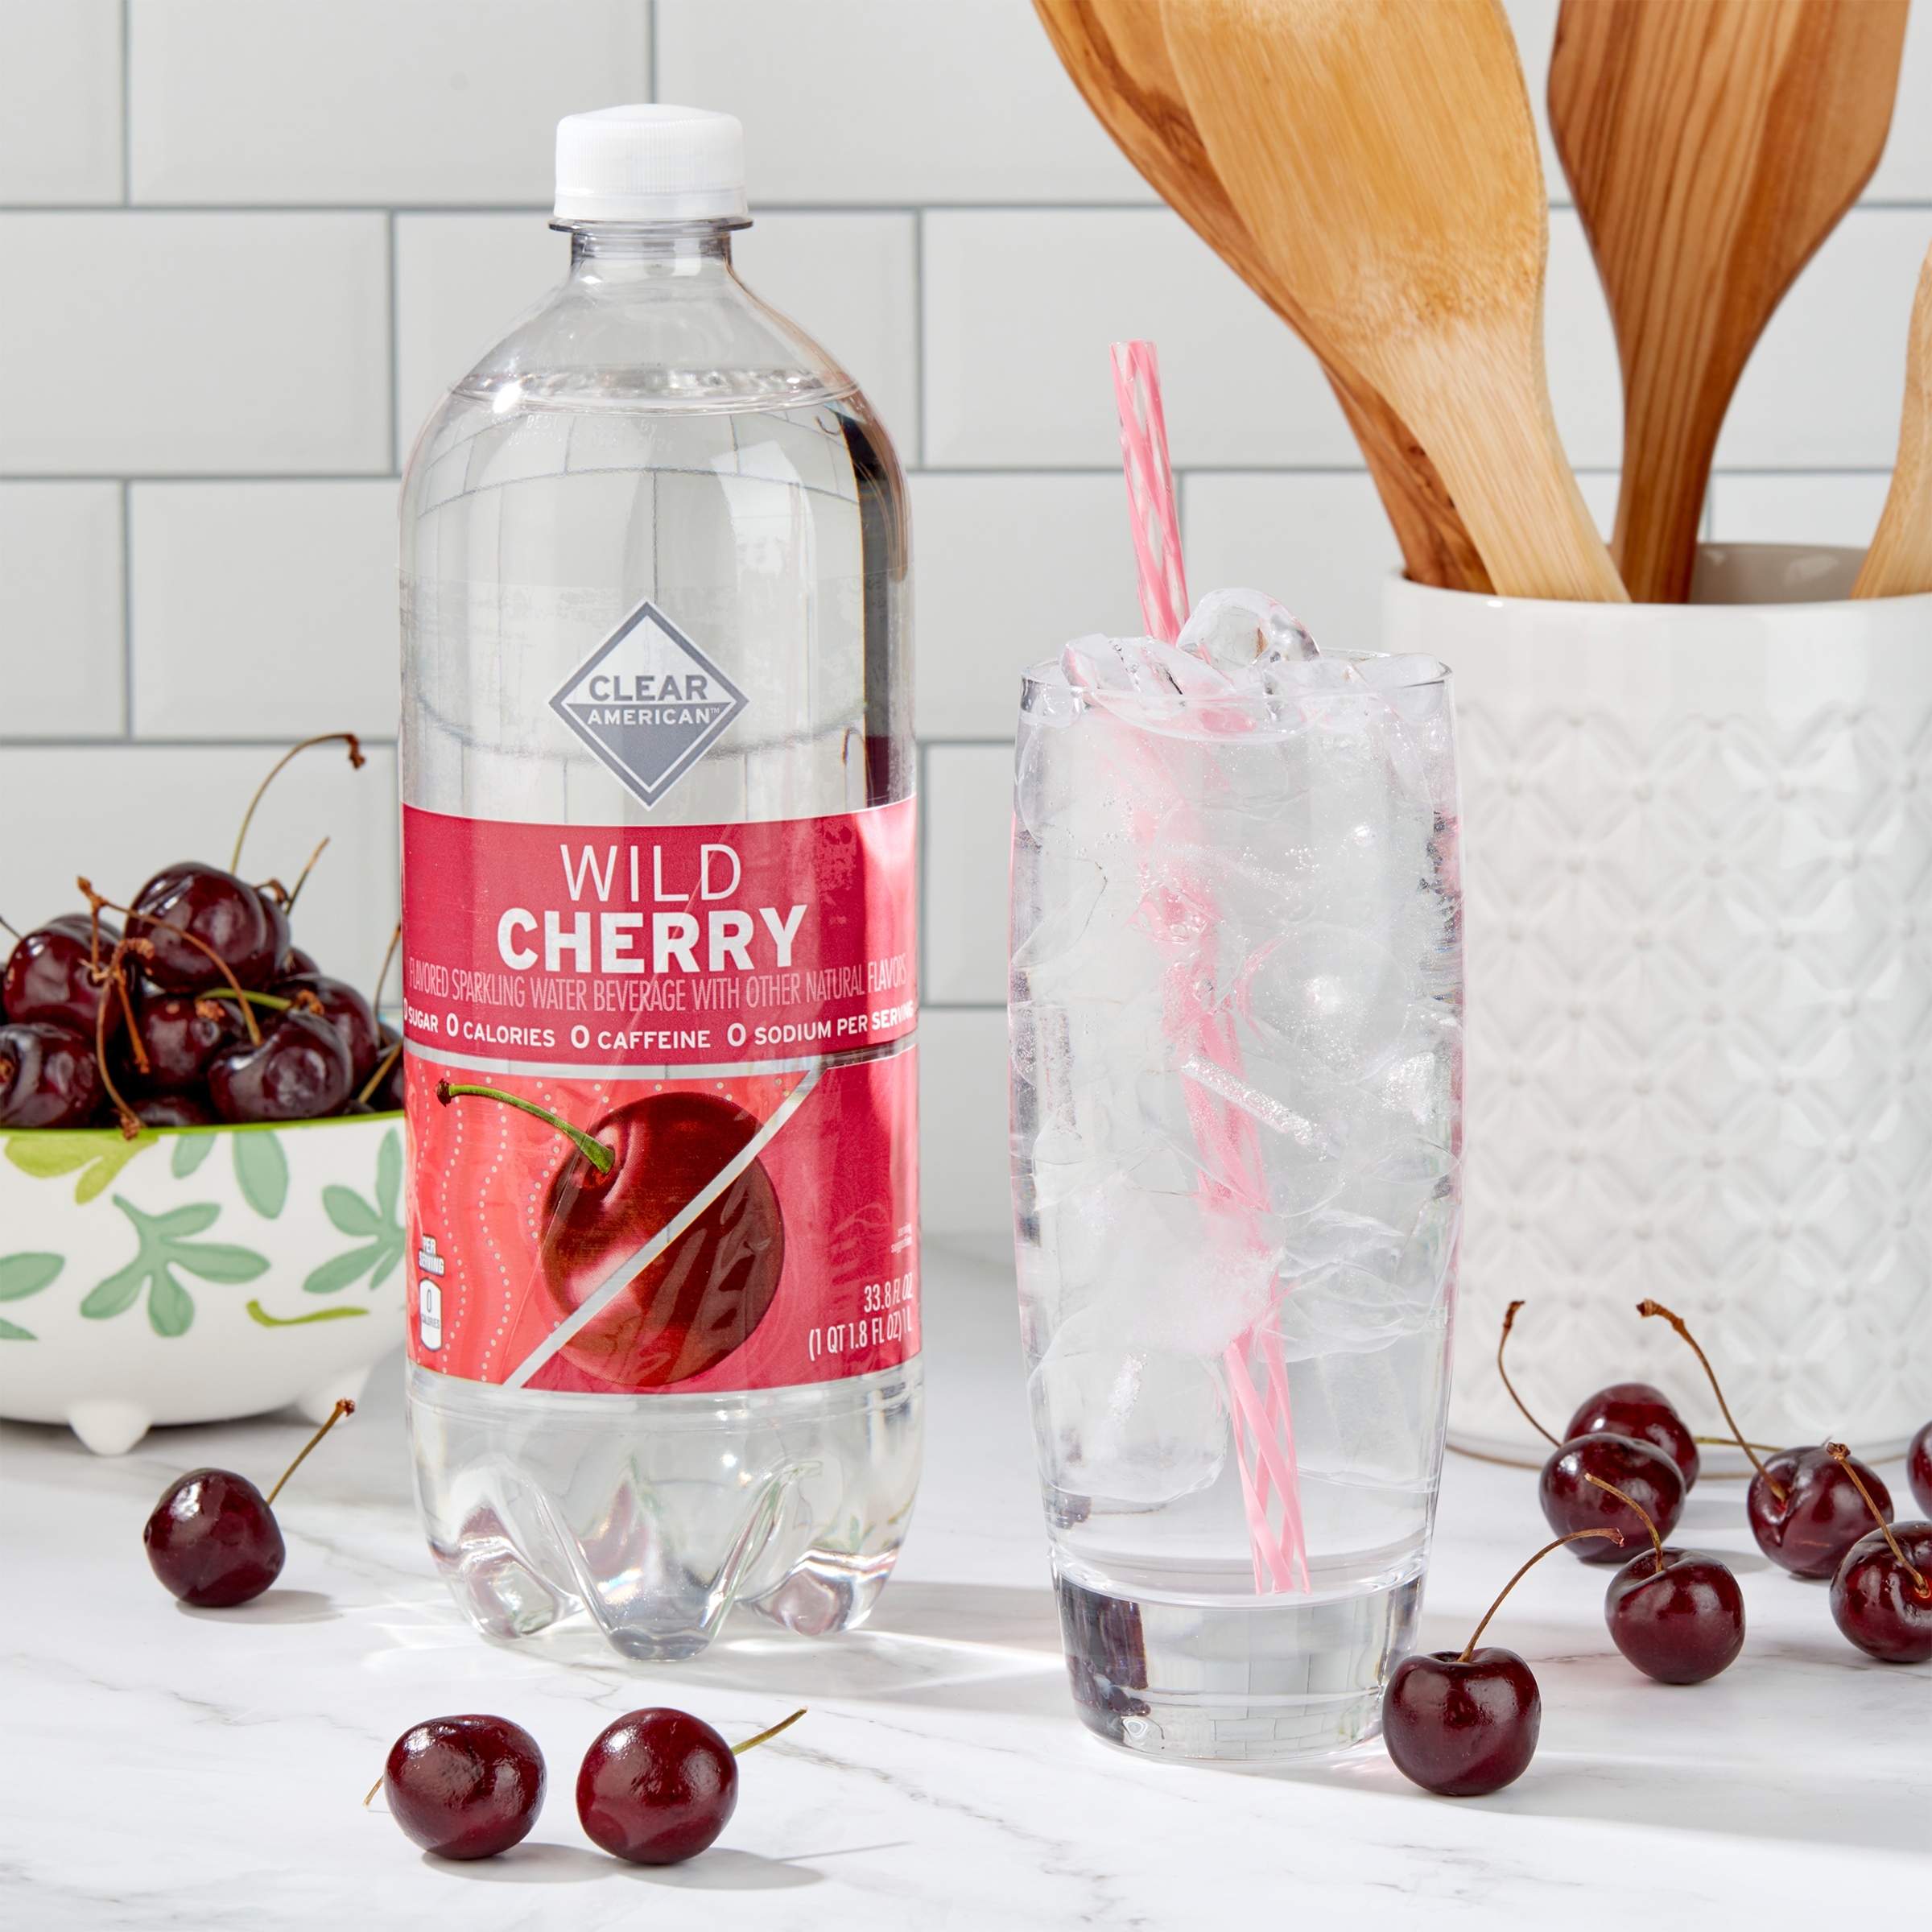 Clear American Sparkling Water, Wild Cherry, 33.8 fl oz - image 2 of 7